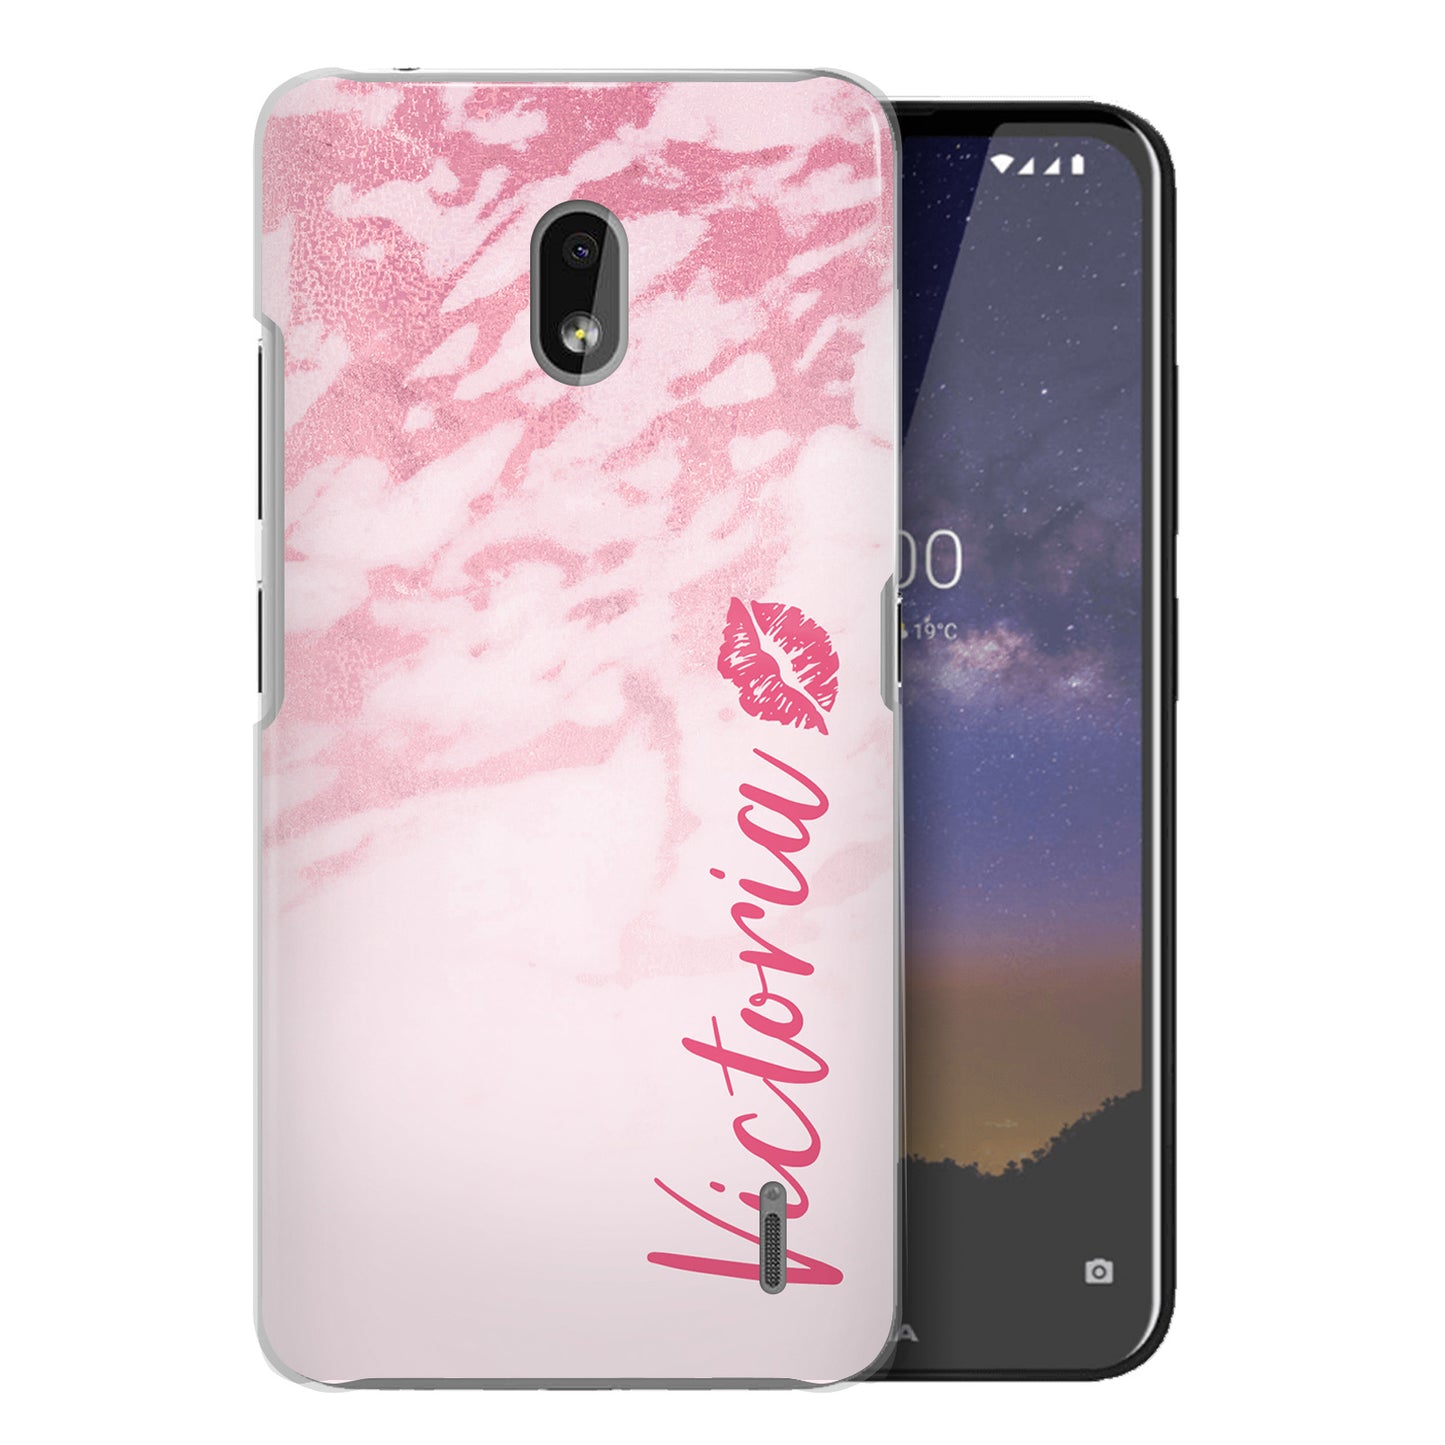 Personalised Nokia Hard Case - Pink Marble & Name Side Kiss